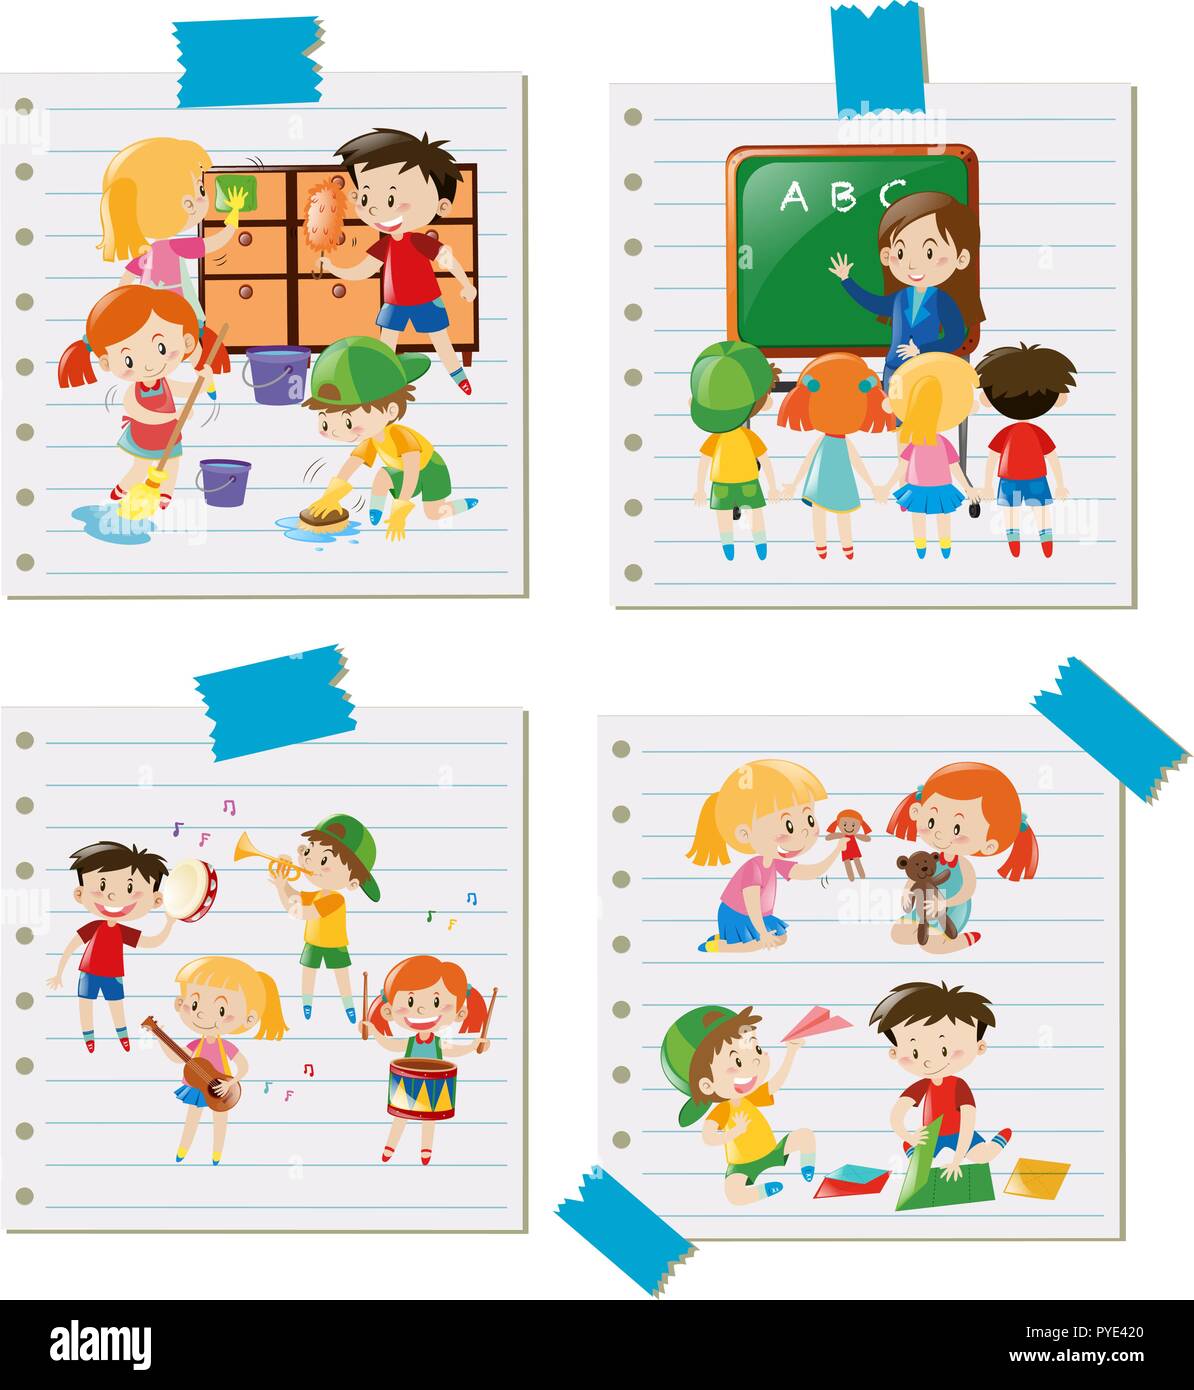 Children doing different activities together illustration Stock Vector